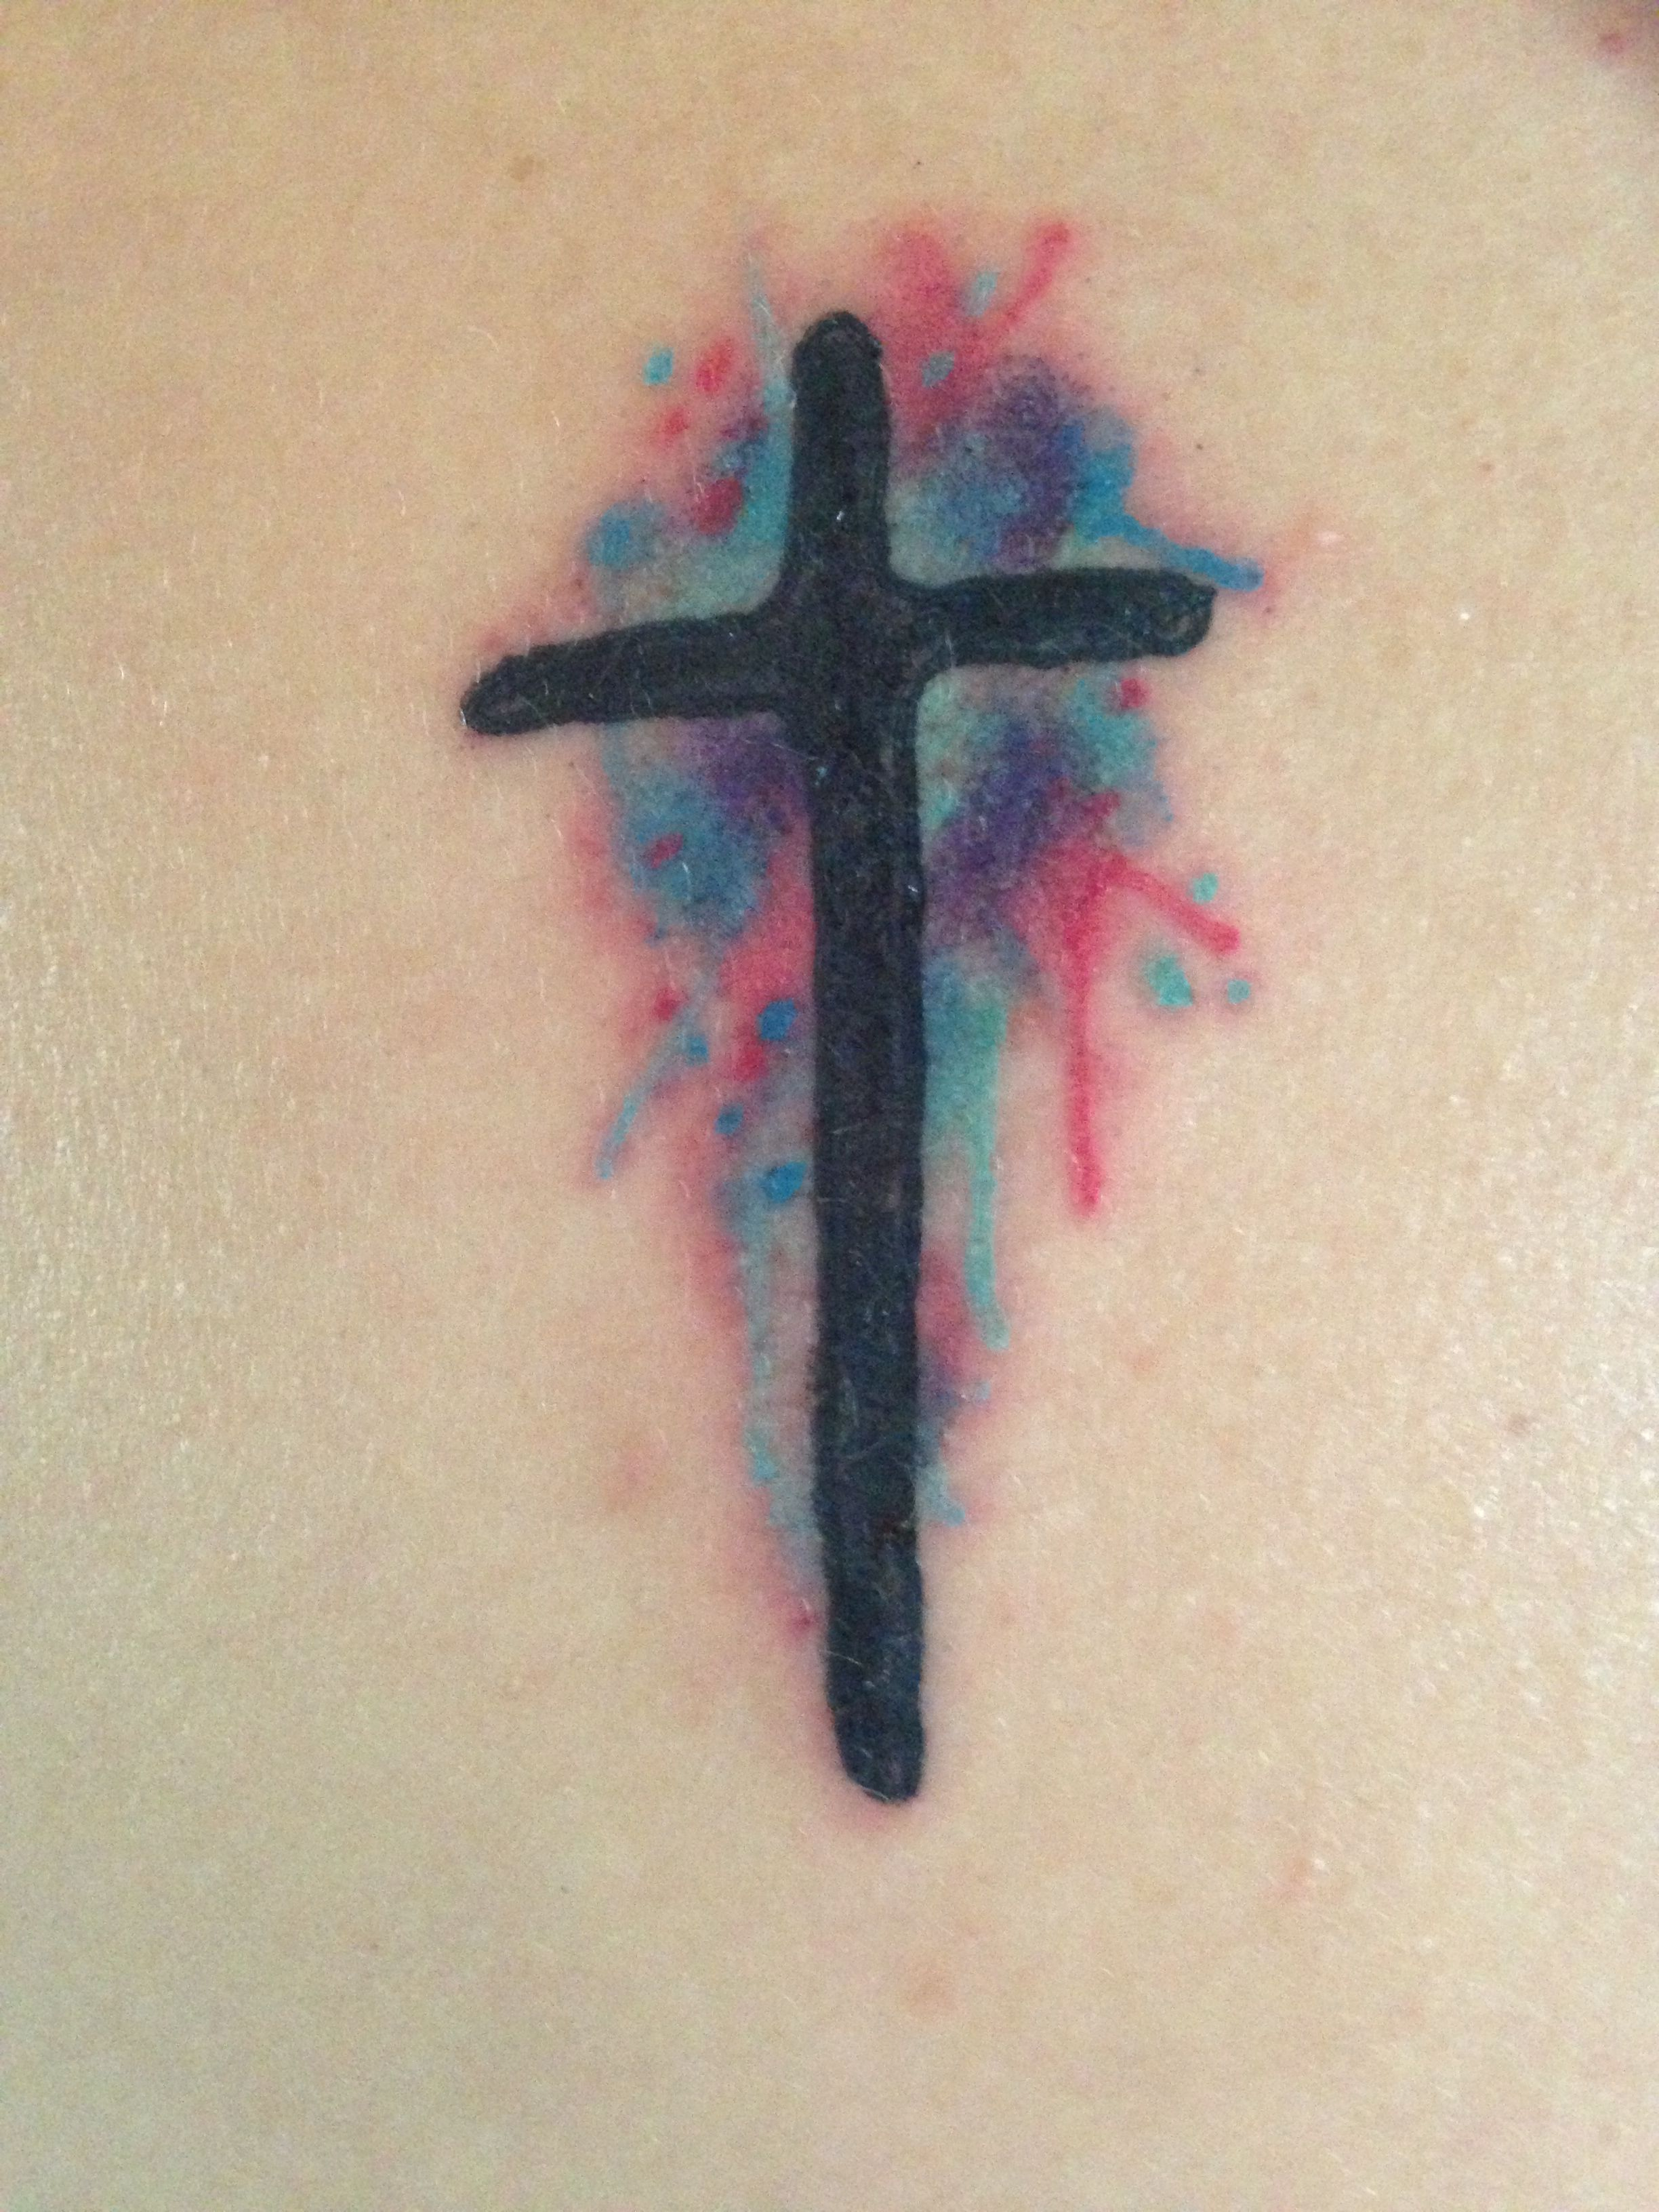 Water Color Cross Tattoo I Dont Like This Specific Tattoo But I for dimensions 2448 X 3264